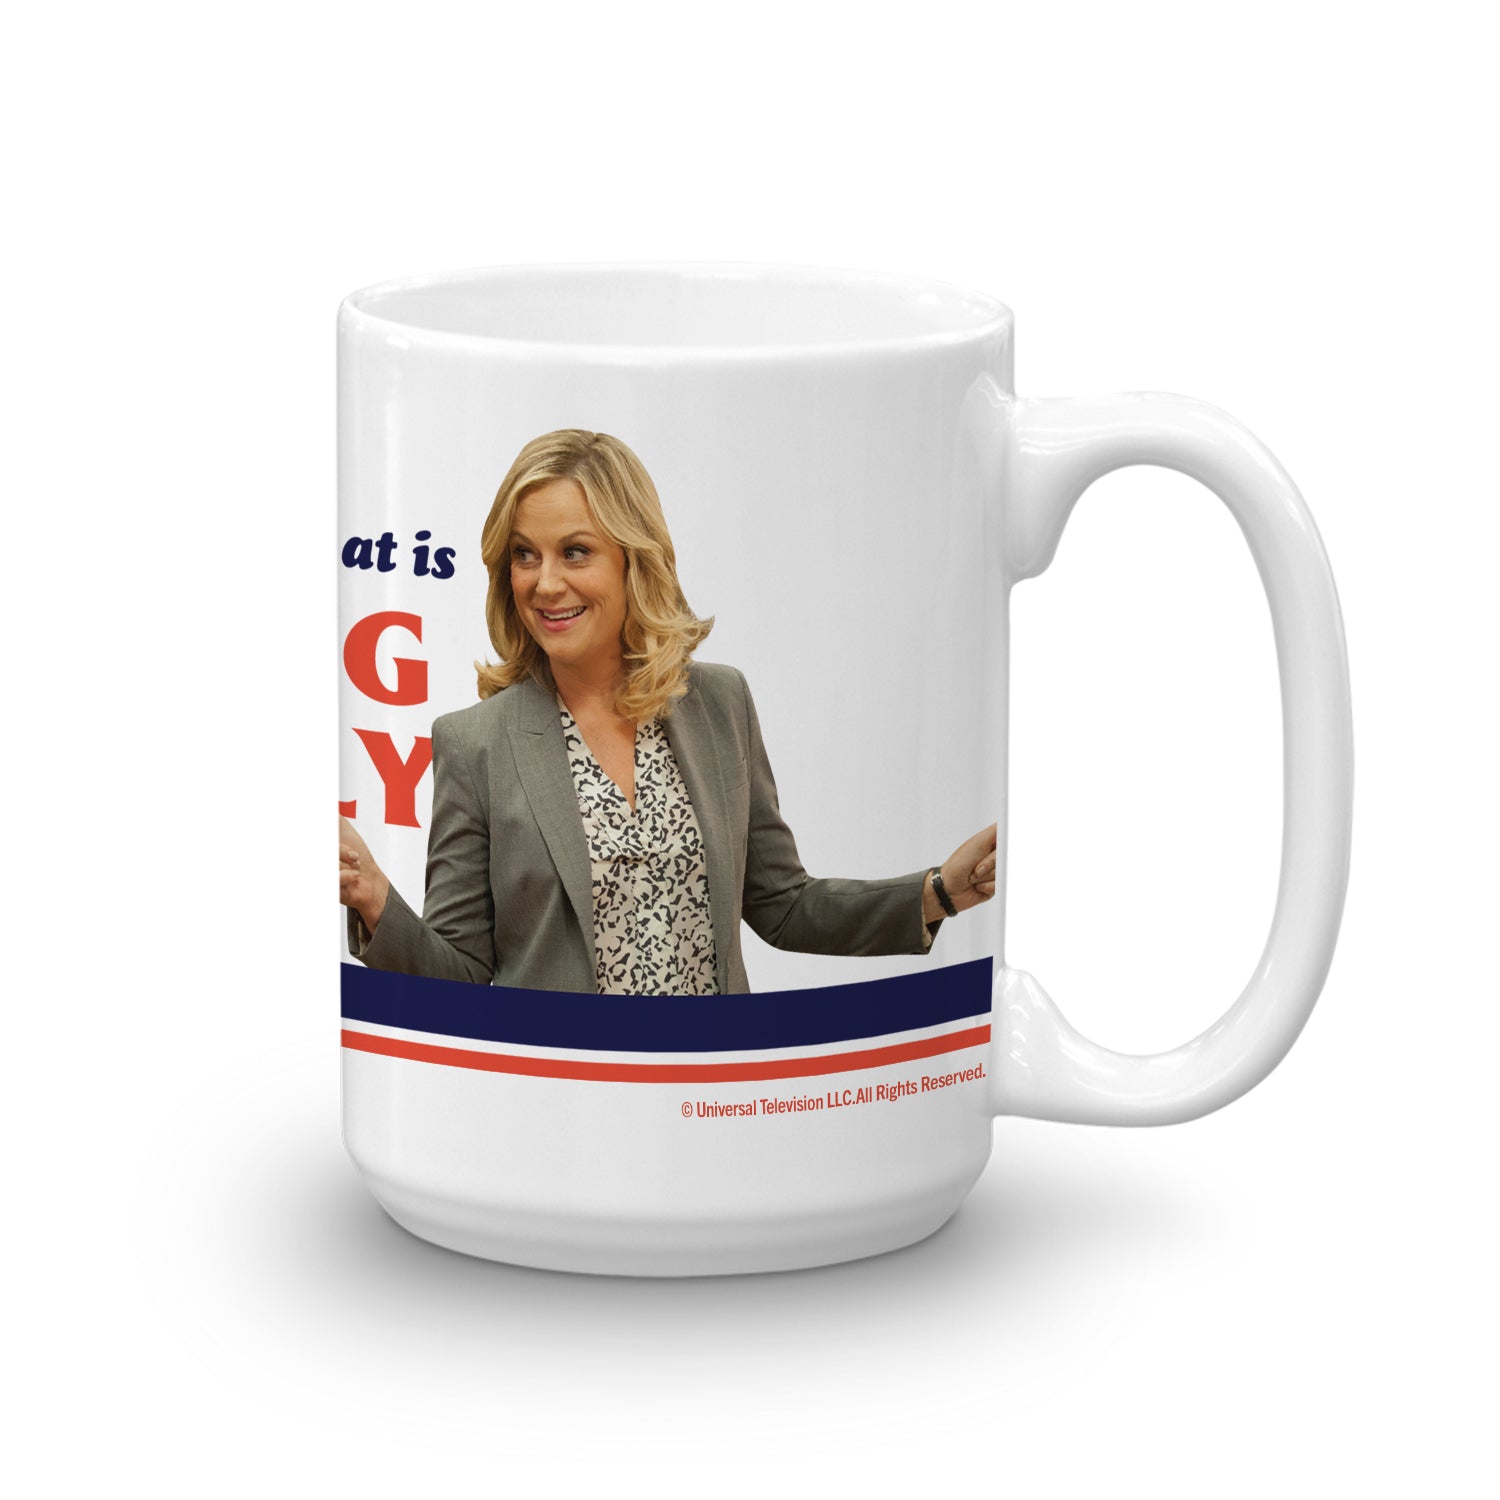 Parks and Recreation Leslie Knope People Caring Loudly Mug